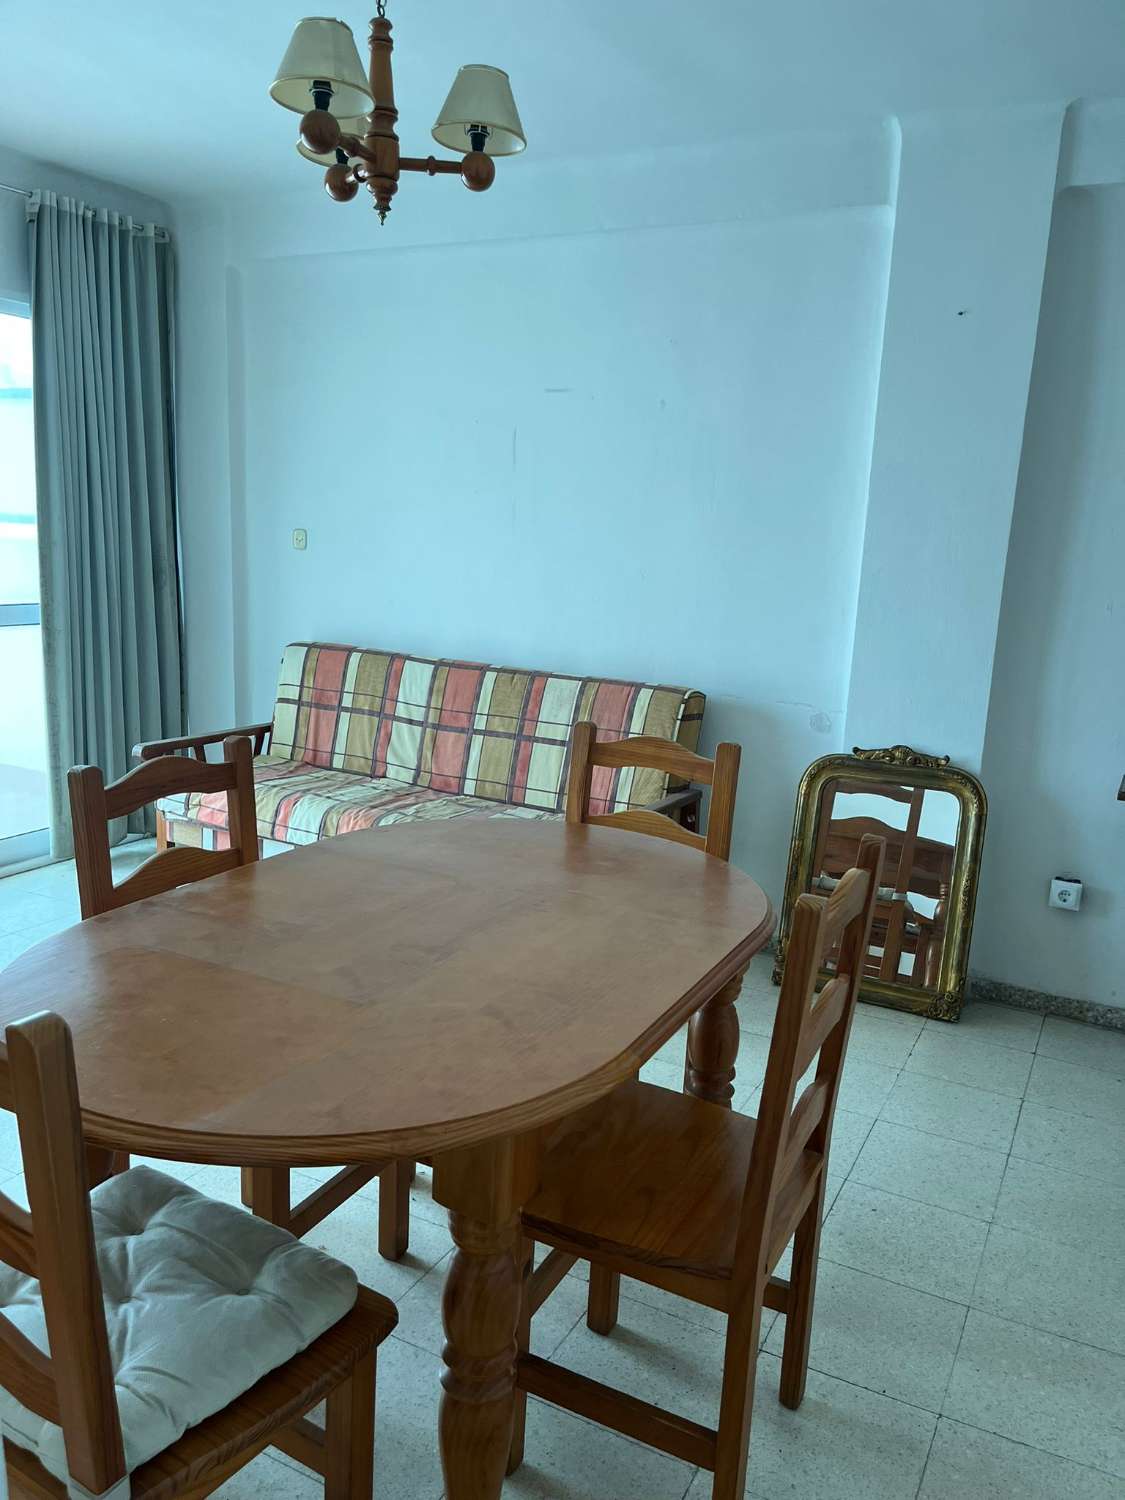 Flat for sale in Centro (Torre del Mar)